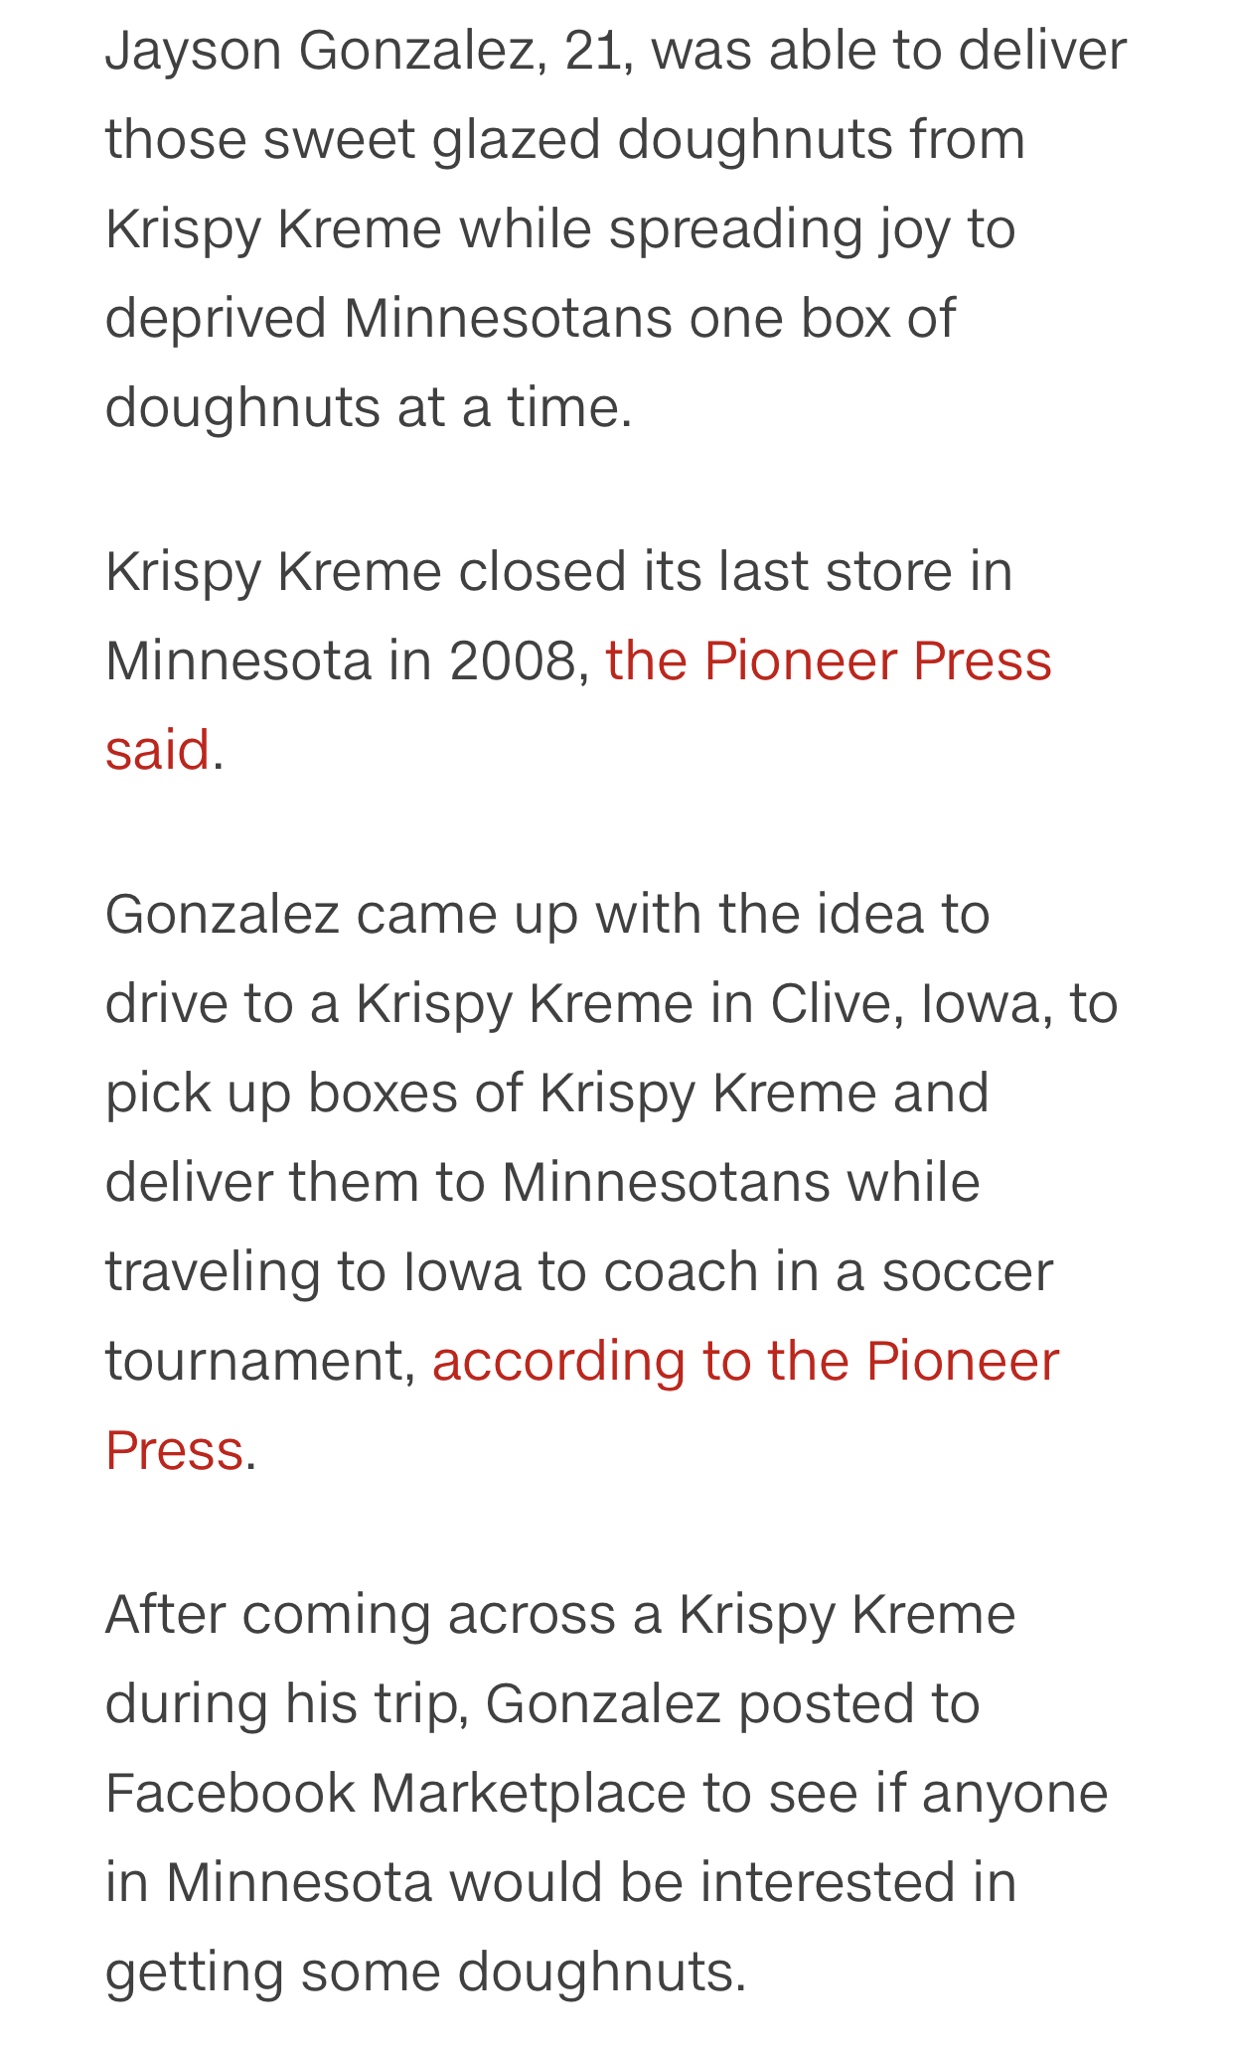 document - Jayson Gonzalez, 21, was able to deliver those sweet glazed doughnuts from Krispy Kreme while spreading joy to deprived Minnesotans one box of doughnuts at a time. Krispy Kreme closed its last store in Minnesota in 2008, the Pioneer Press said.